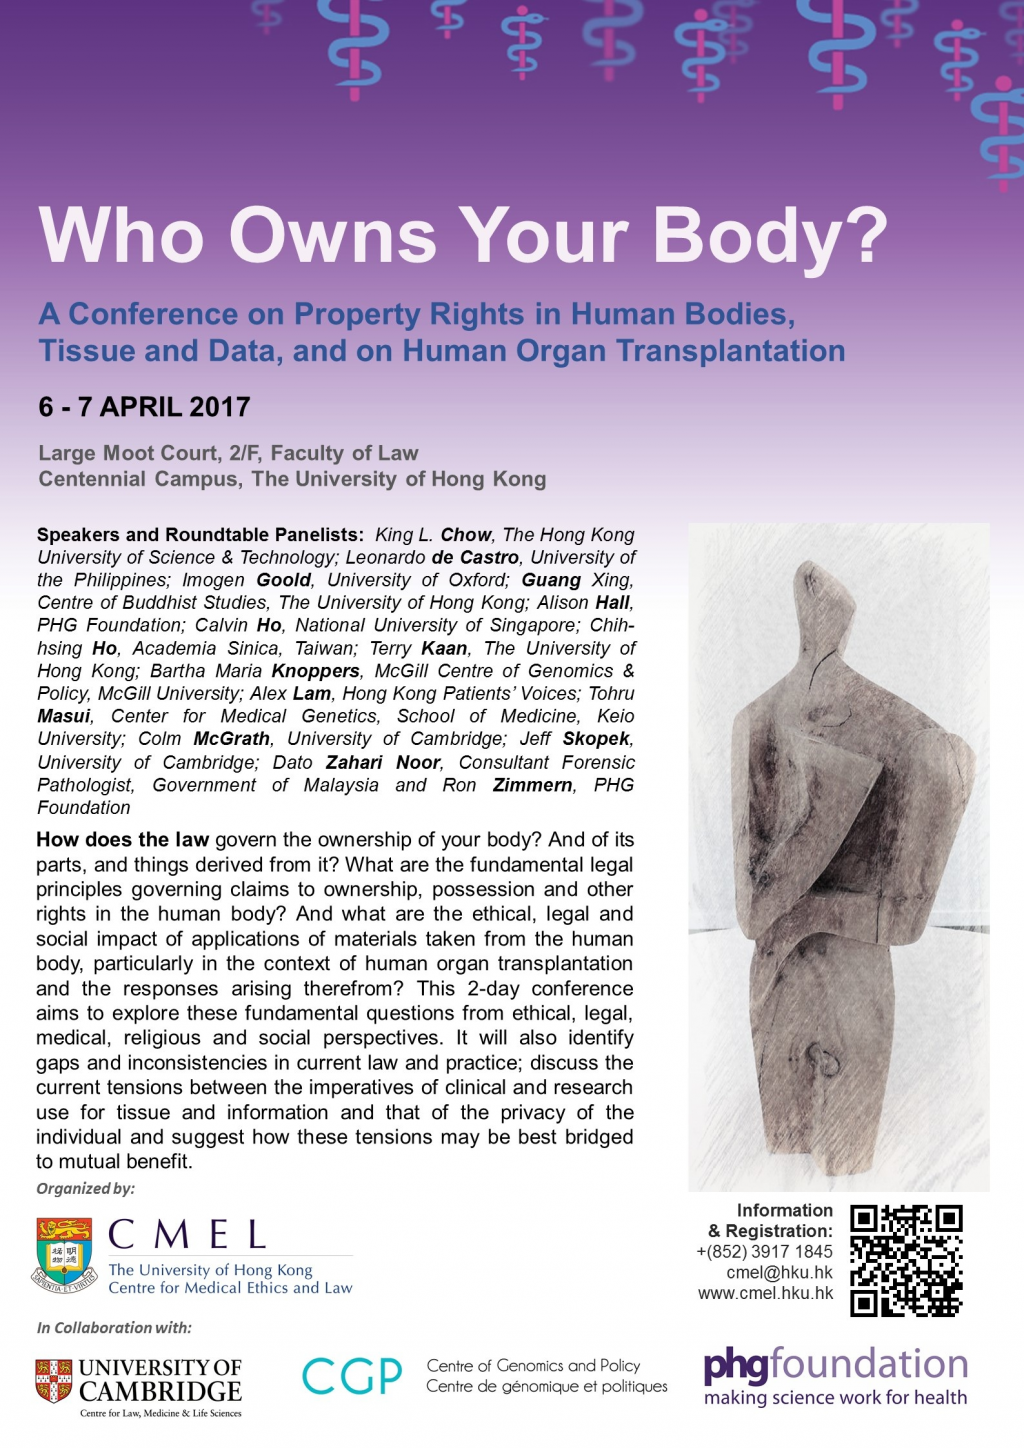 Who Owns Your Body?